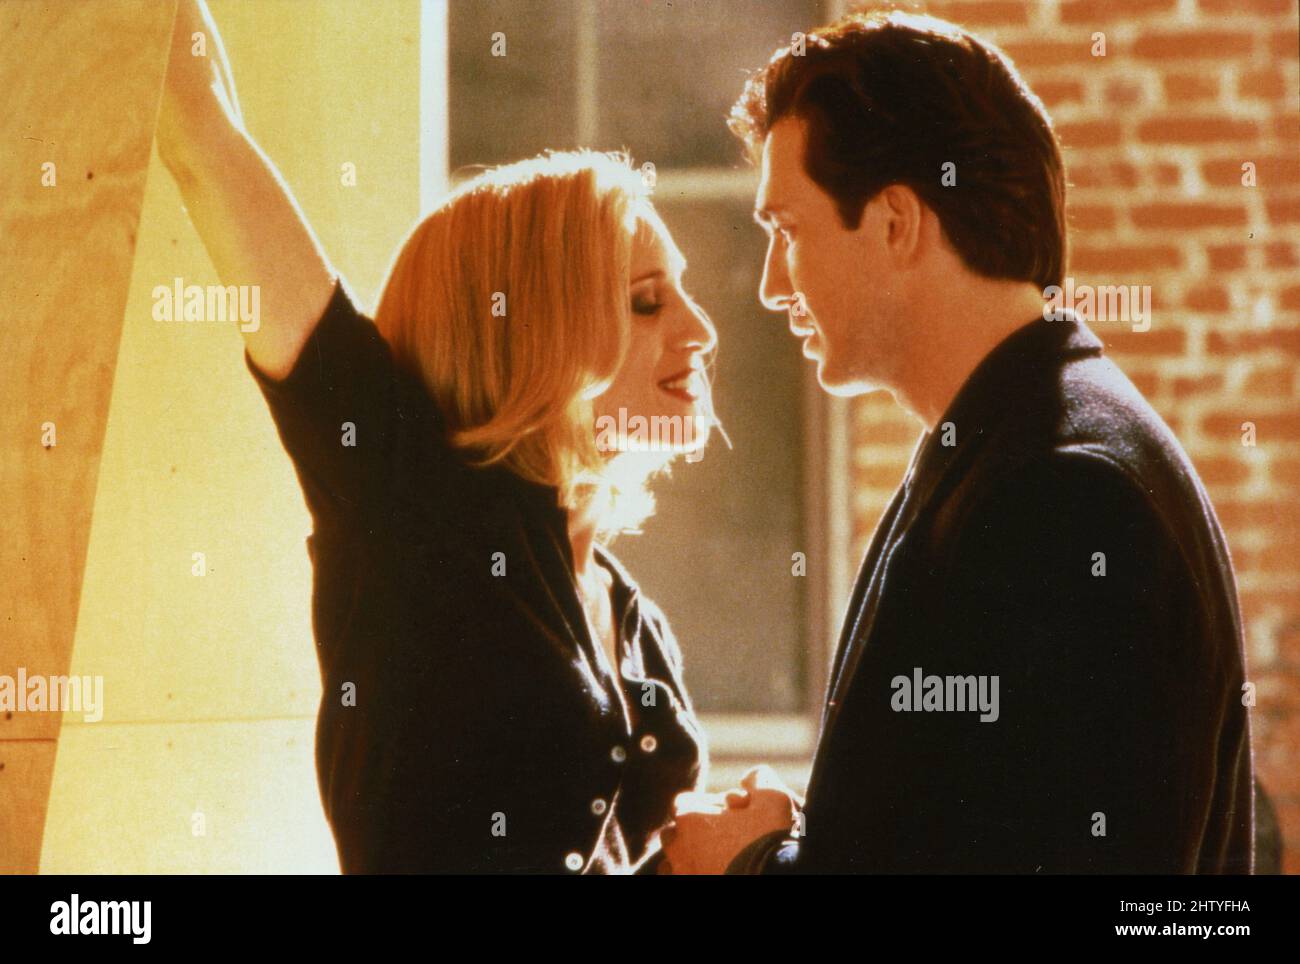 American actress Sarah Jessica Parker and actor Dylan McDermott in the movie 'Til There Was You, USA 1997 Stock Photo